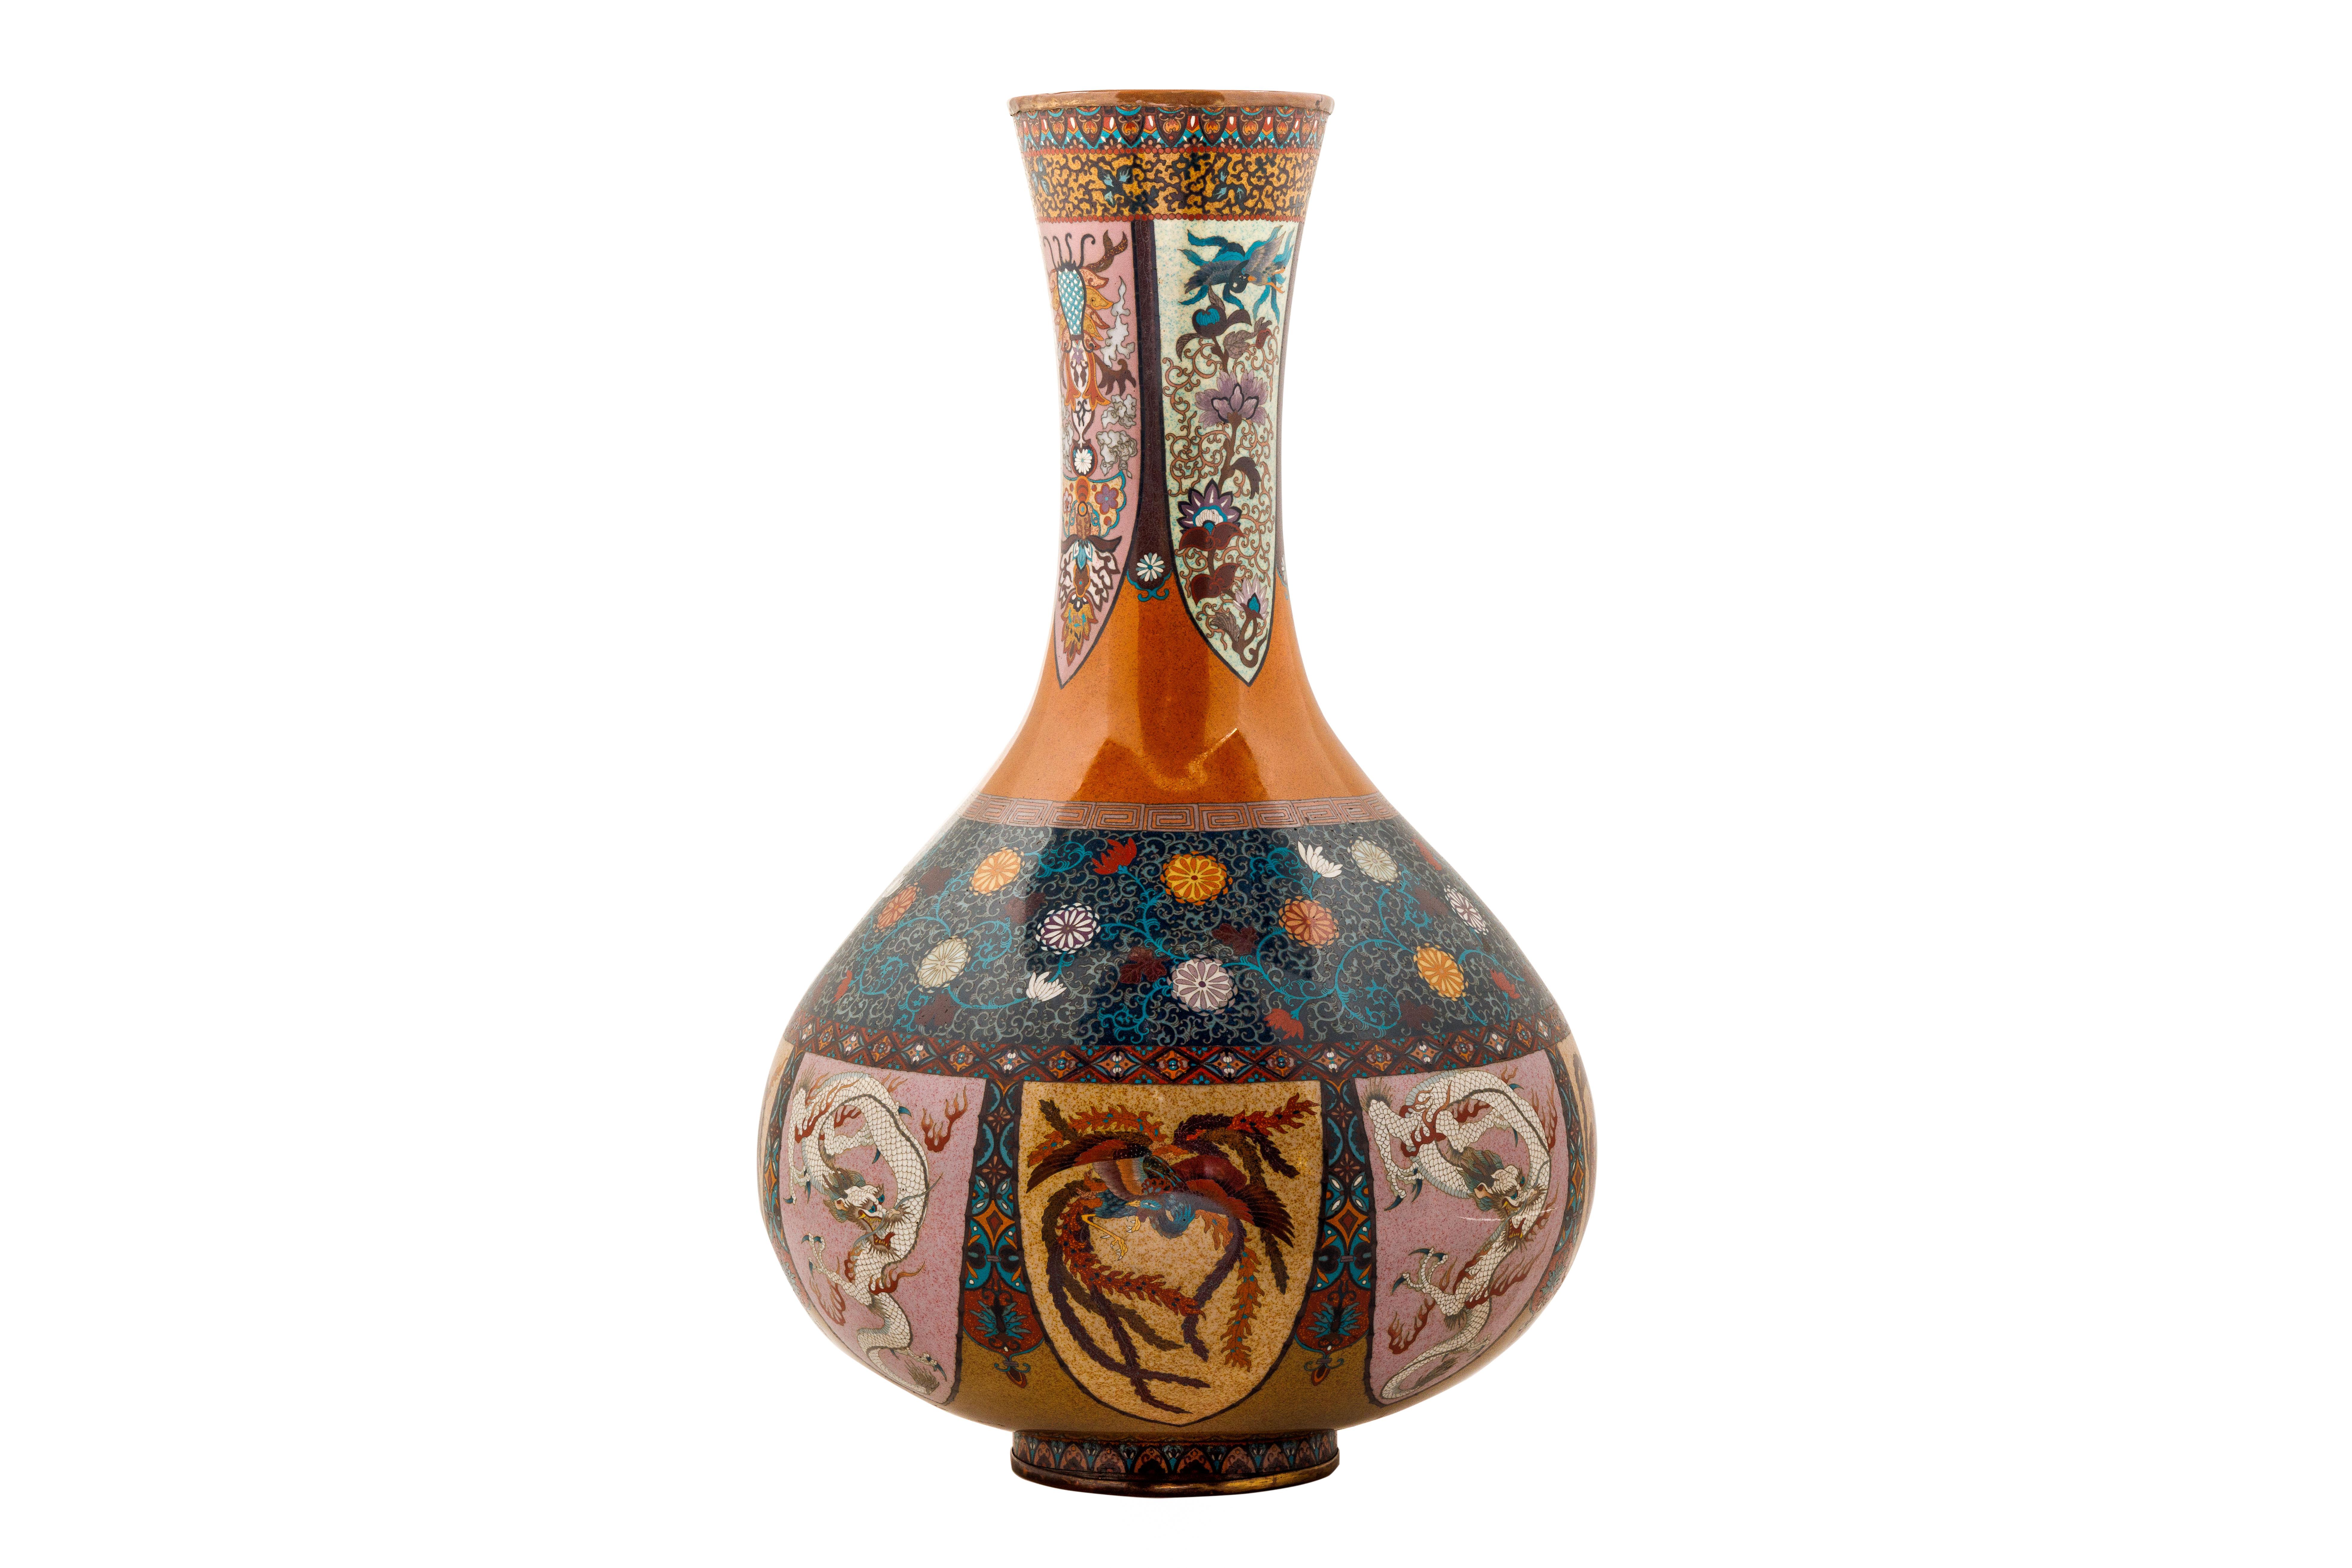 A large pair of Japanese Cloisonne Enamel vases attributed to Honda Yasaburo, 19th century.

Finley decorated with the rich enamel colors of orange and green, these vases are designed with birds, phoenix, dragons, lotus and paulownia flowers and